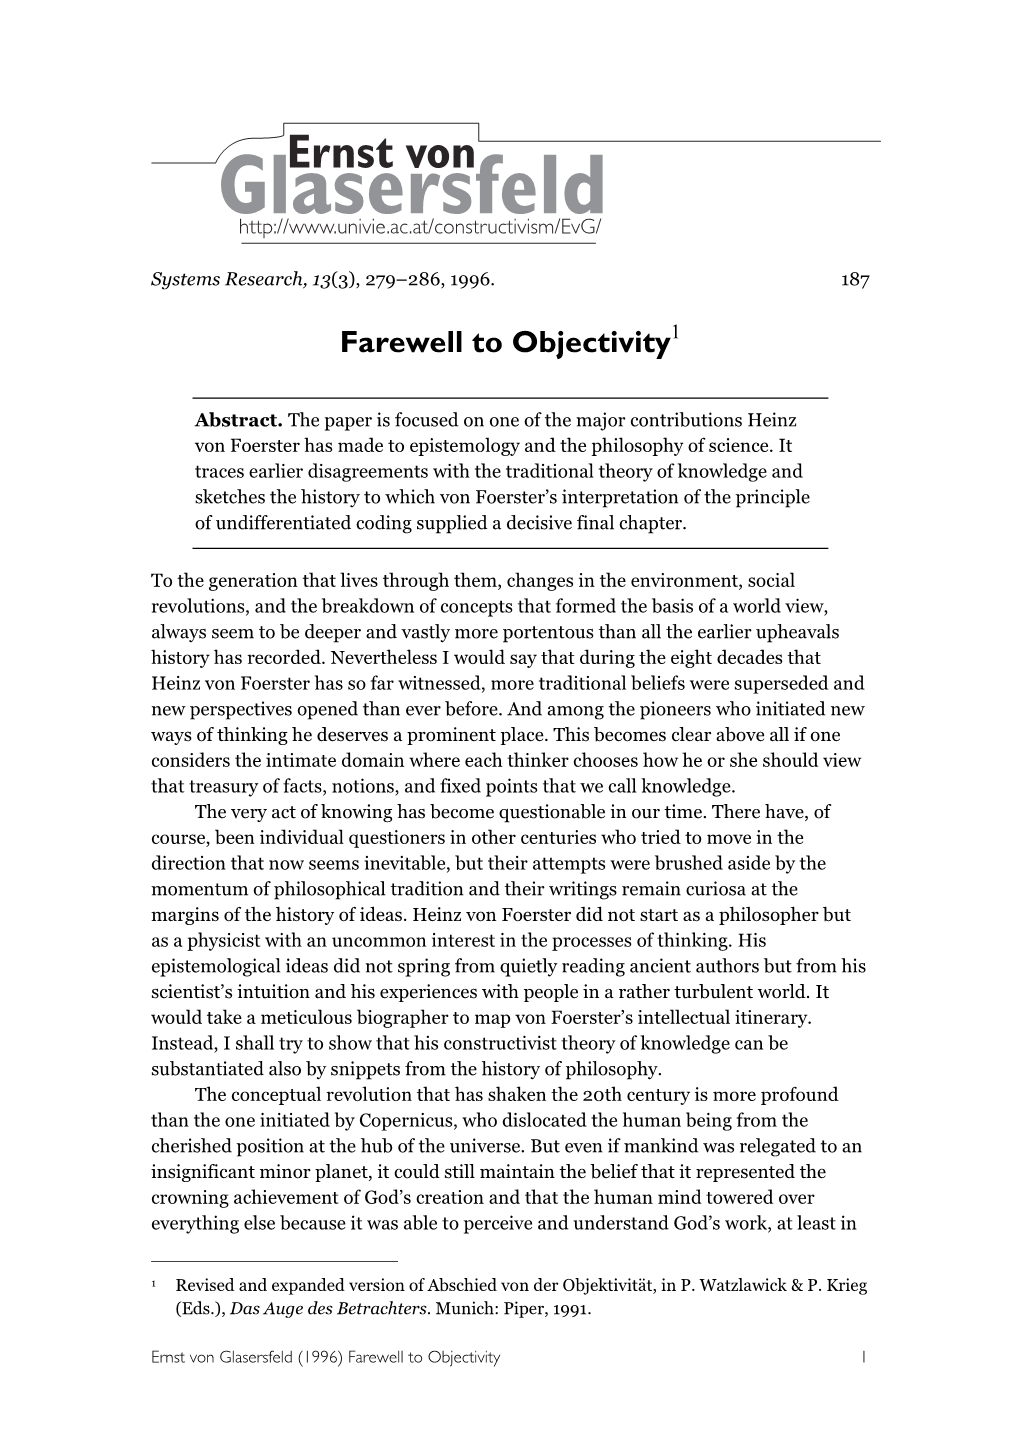 Farewell to Objectivity1